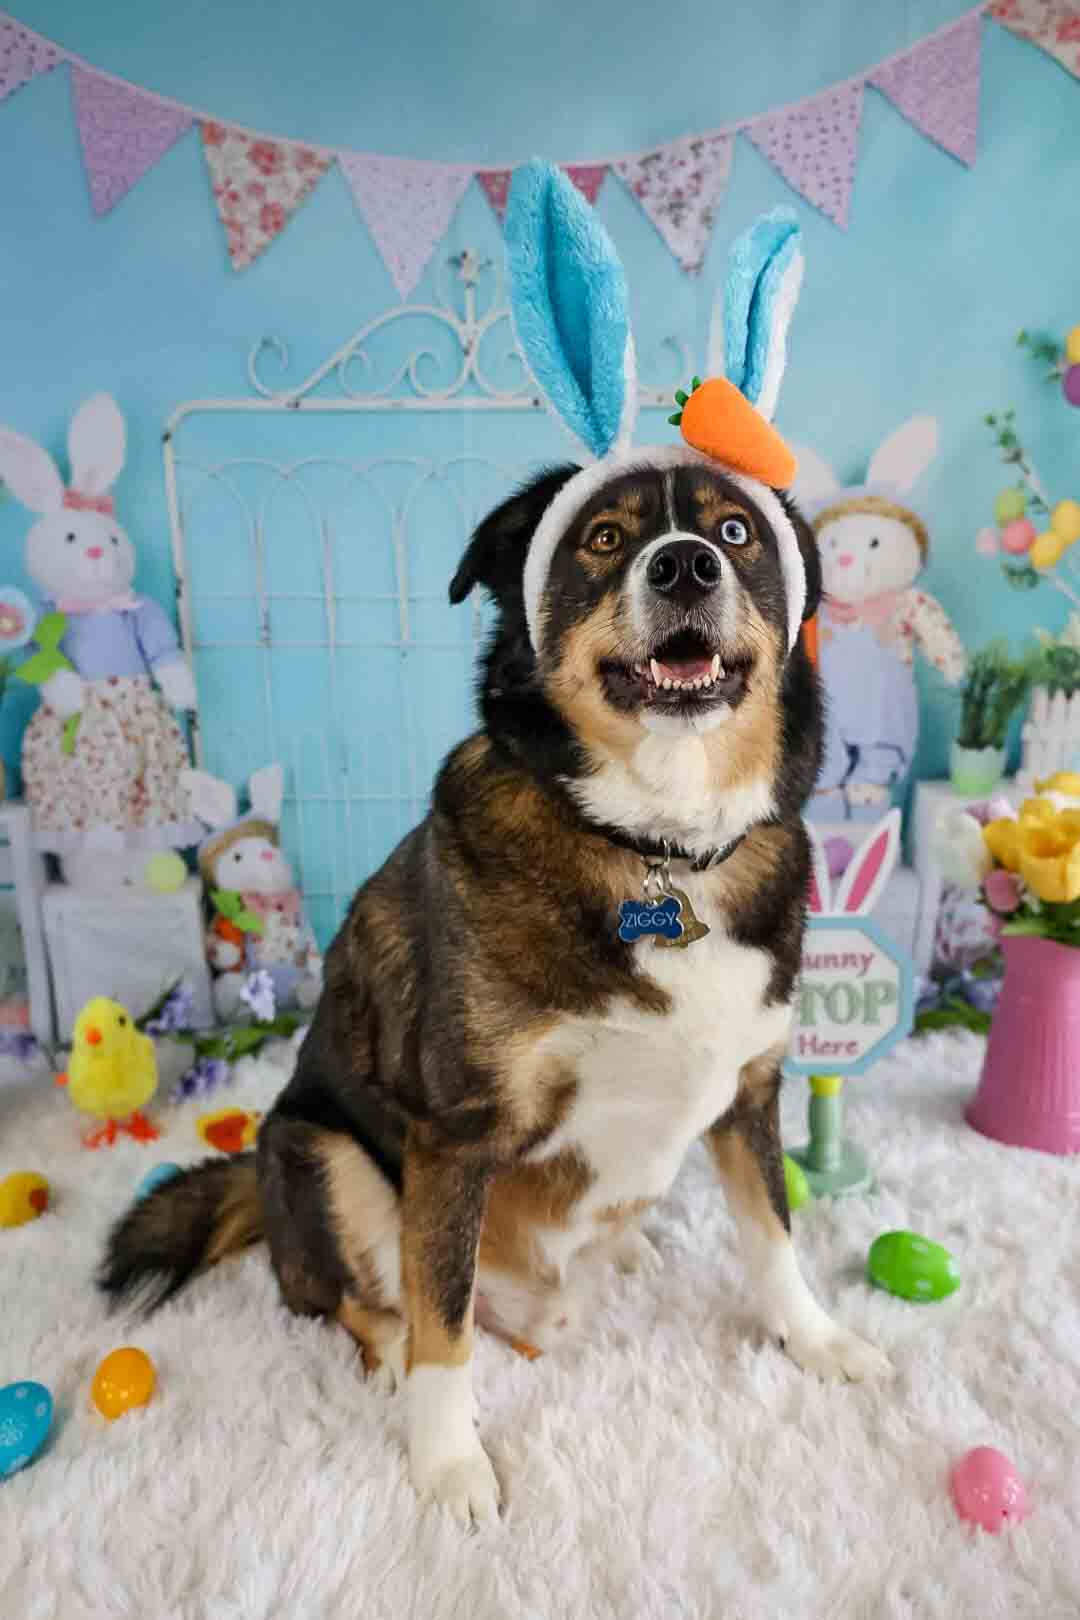 Kate Pet Cake Smash Easter Colorful Eggs Backdrop for Photography